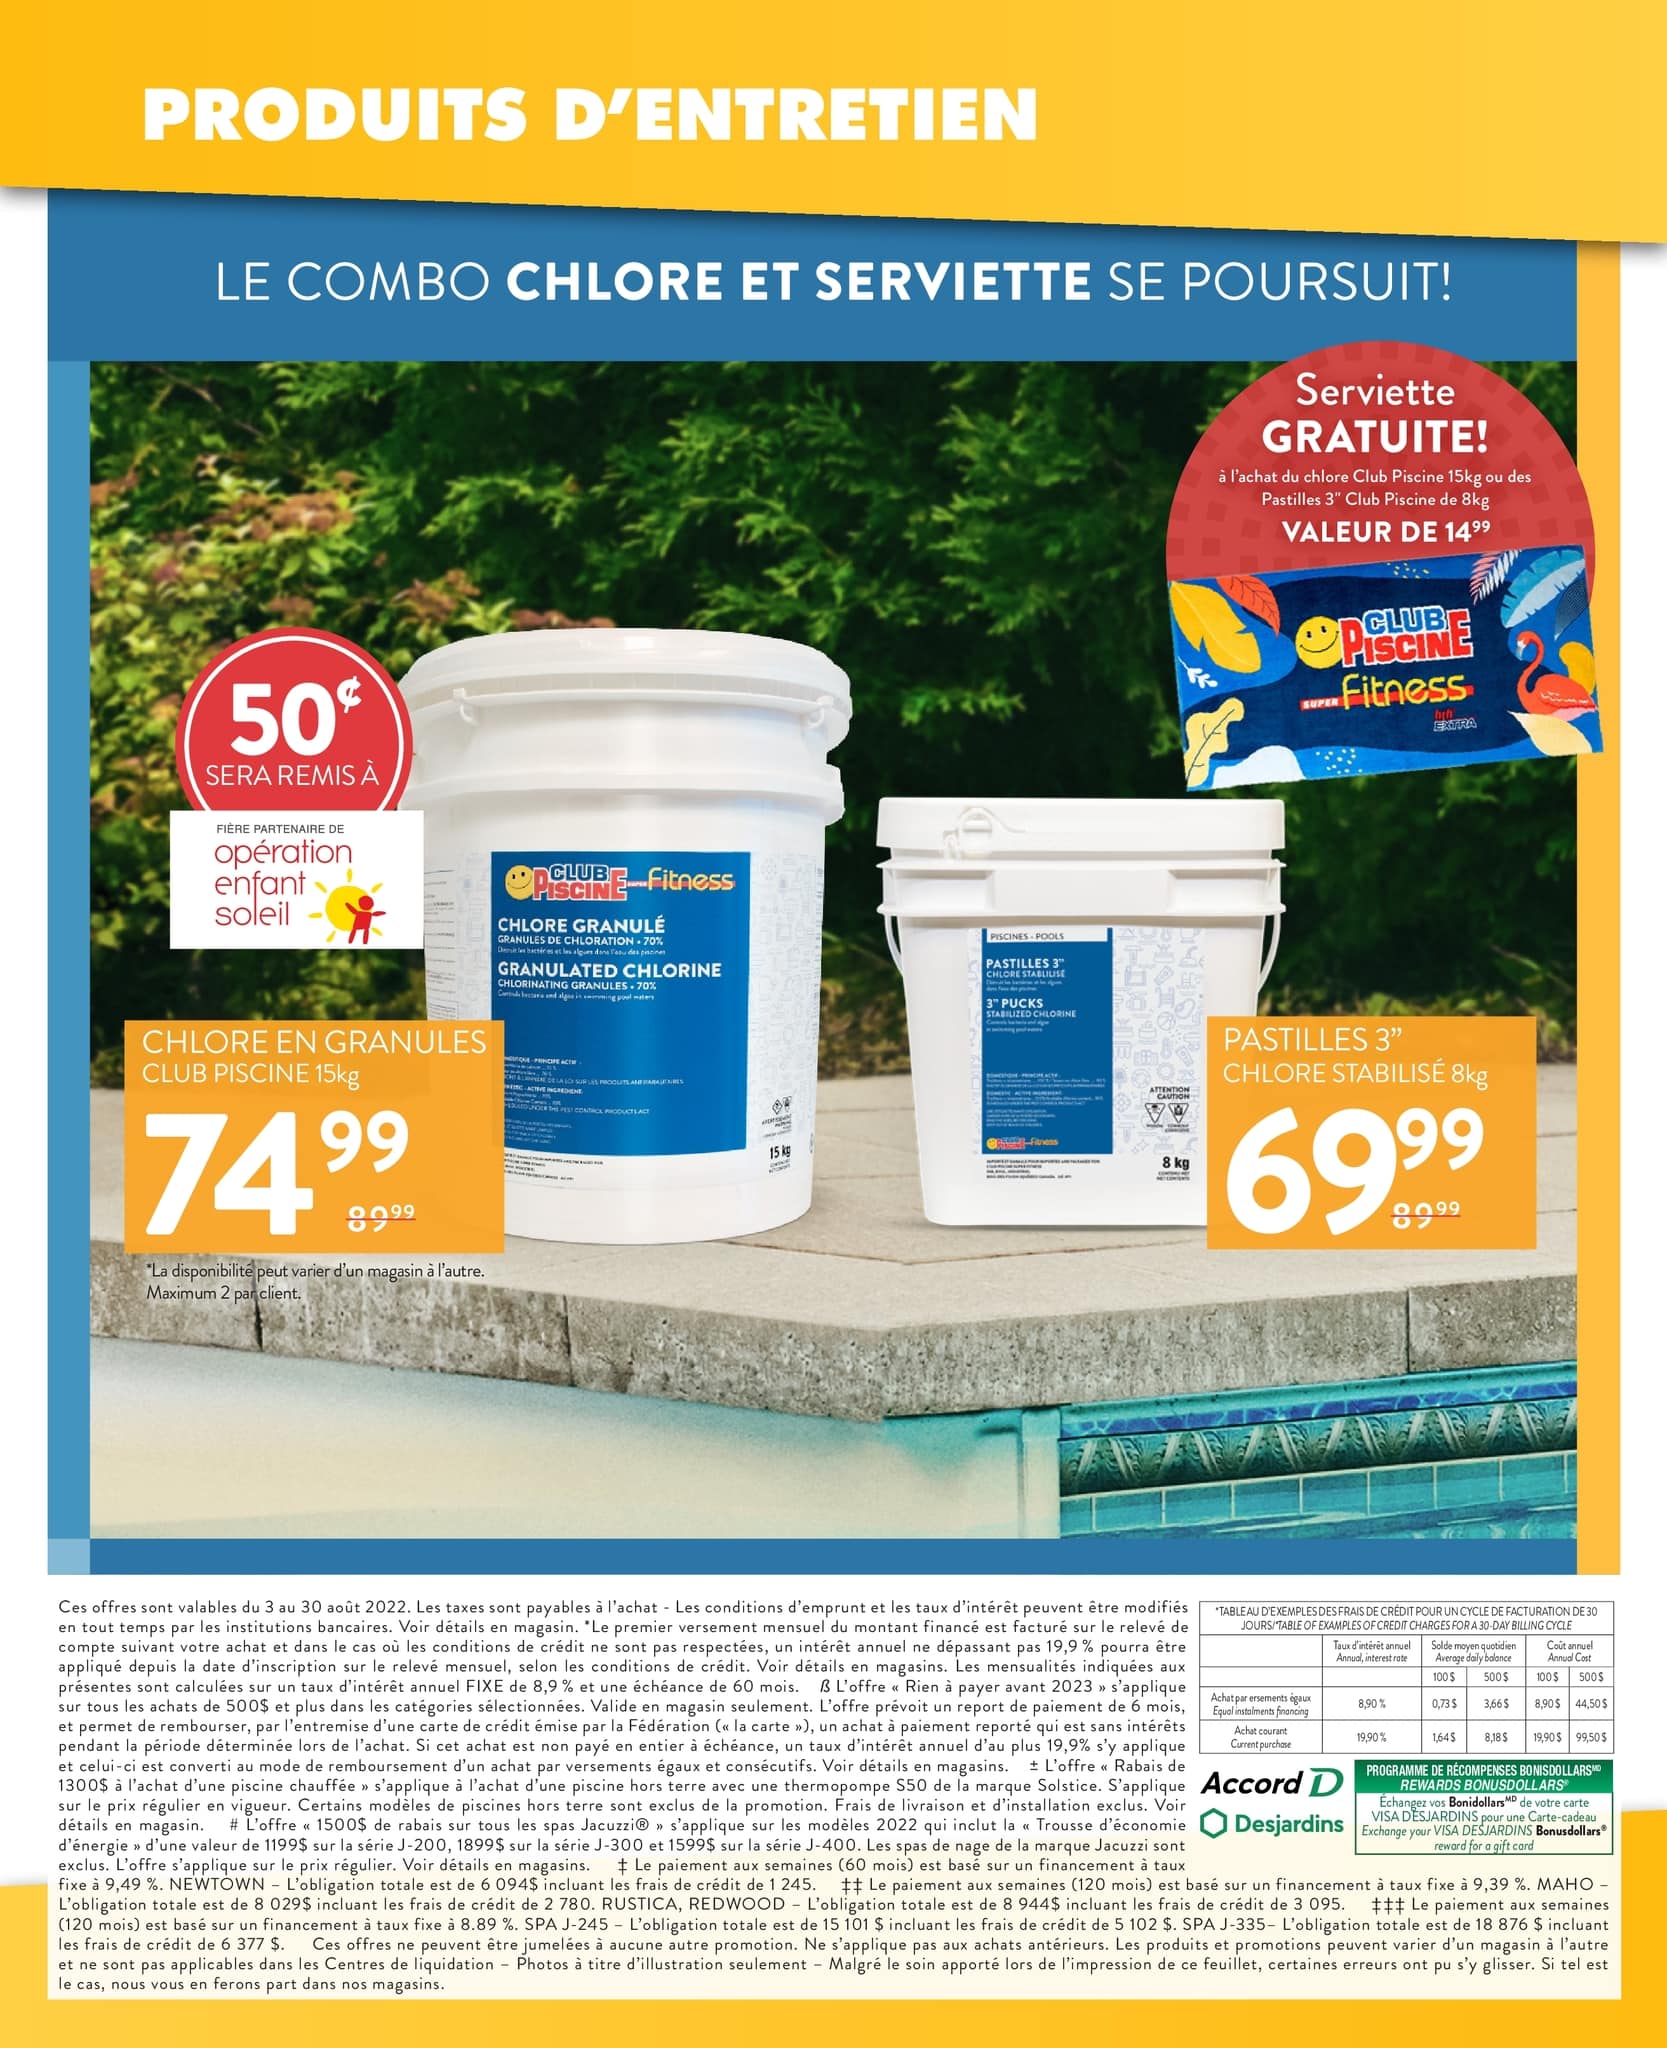 Circulaire Club Piscine Super Fitness - Page 15